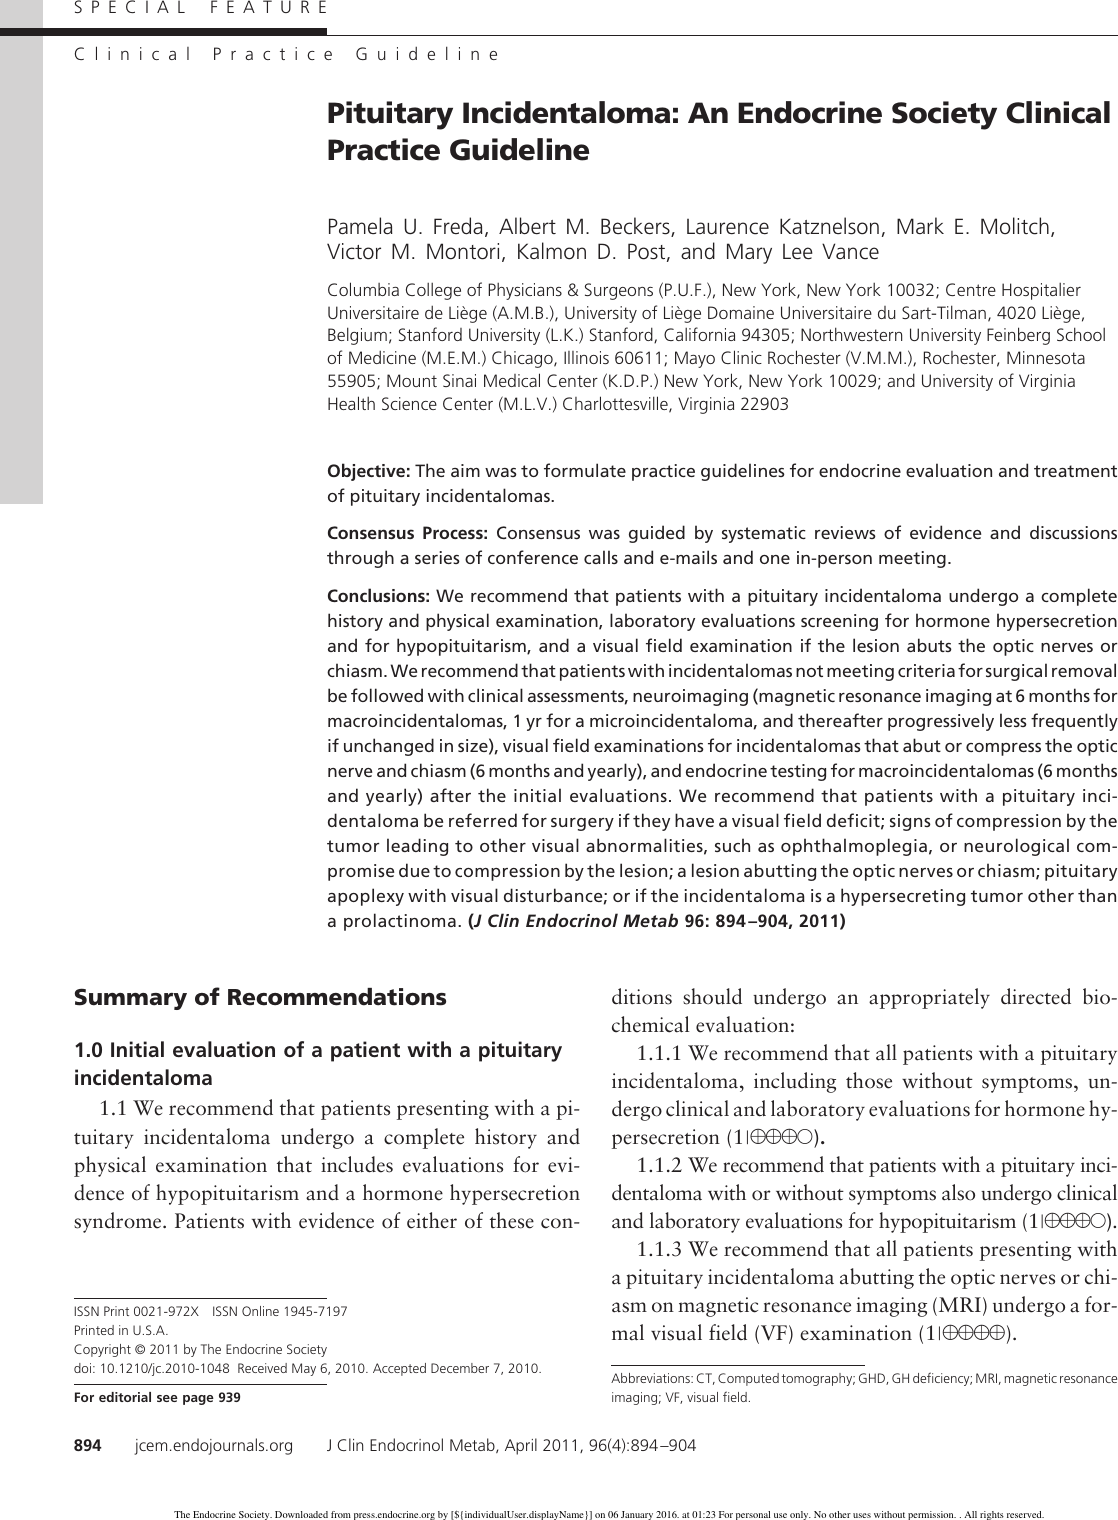 Page 1 of 11 - Pituitary Incidentaloma: An Endocrine Society Clinical Practice Guideline Incidentaloma Guide 2011